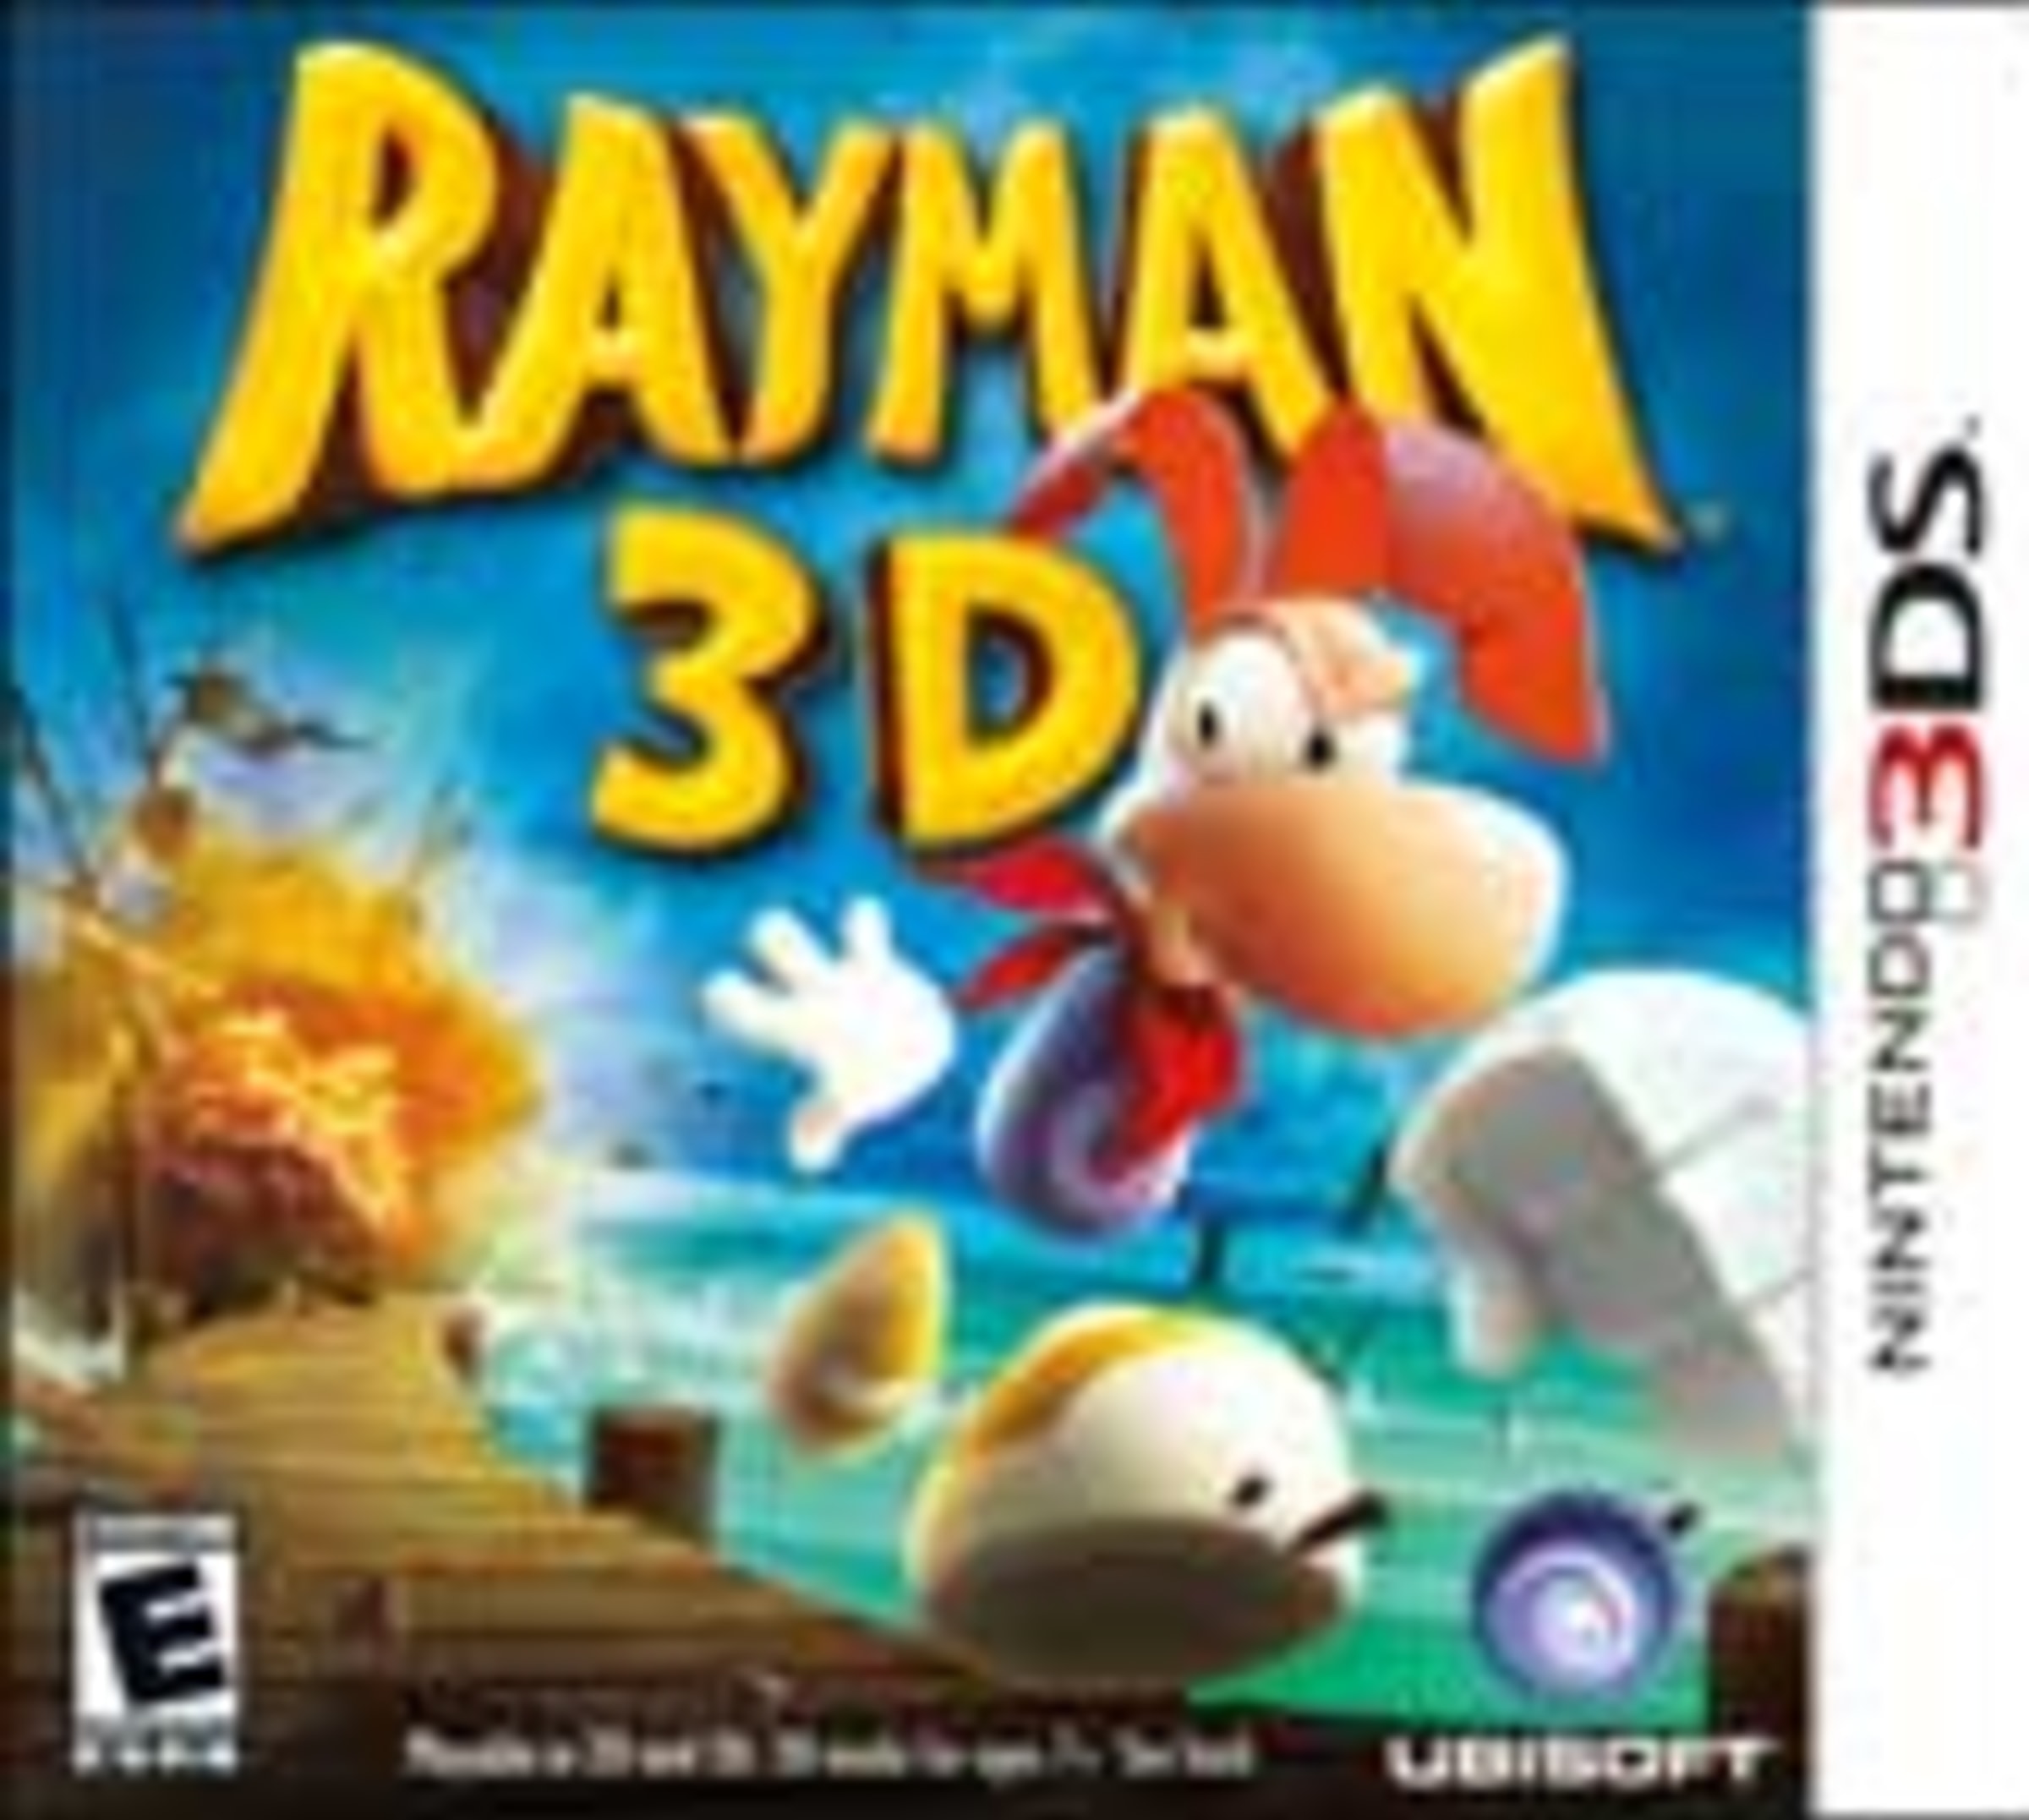 RAYMAN 3D for Nintendo 3DS - Nintendo Official Site